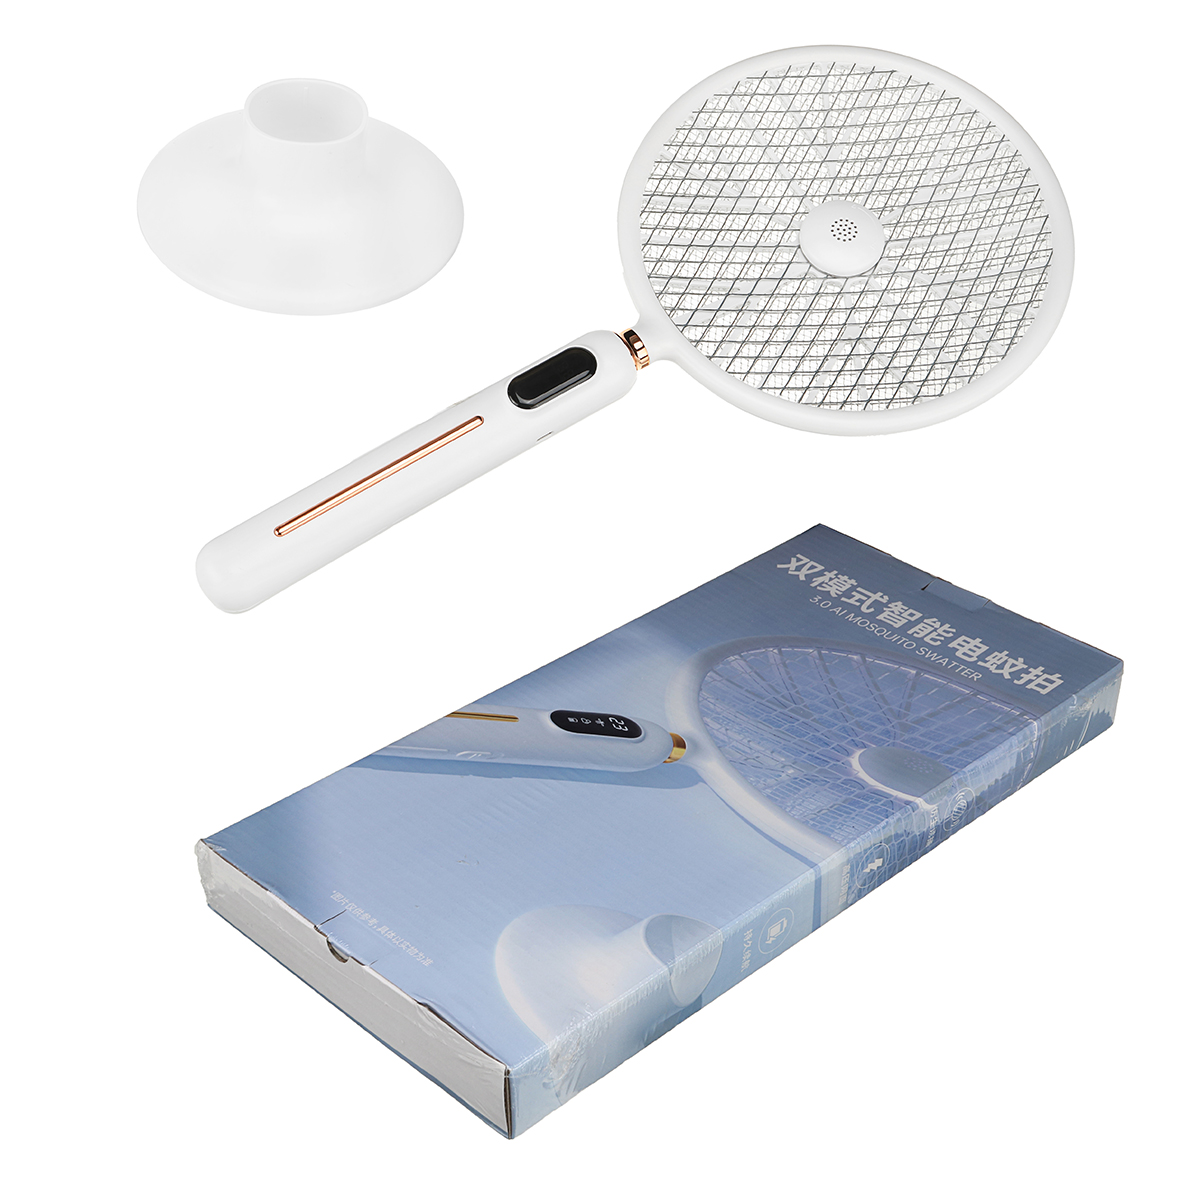 1200mAh-Mosquito-Killer-Lamp-Human-Body-Induction-Smart-Counting-Mosquito-Swatter-USB-Rechargable-LE-1937273-16